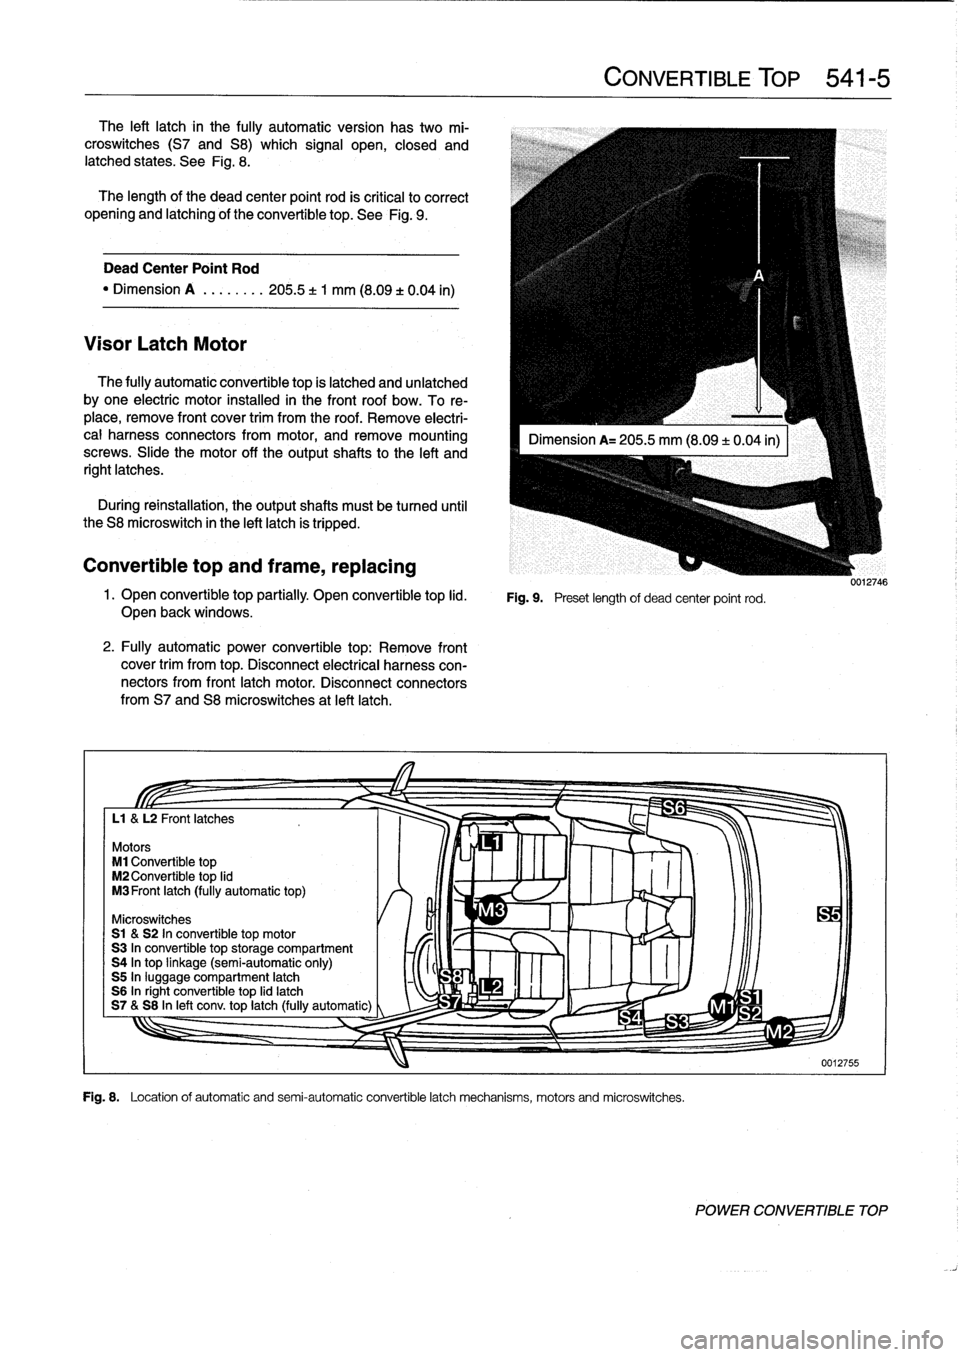 BMW 318i 1996 E36 Service Manual 
The
left
latch
in
the
fully
automatic
version
hastwo
mi-
croswitches
(S7
and
S8)which
signal
open,
closed
and
latched
states
.
See
Fig
.
8
.

The
length
of
the
dead
center
point
rod
is
critica¡
lo
c